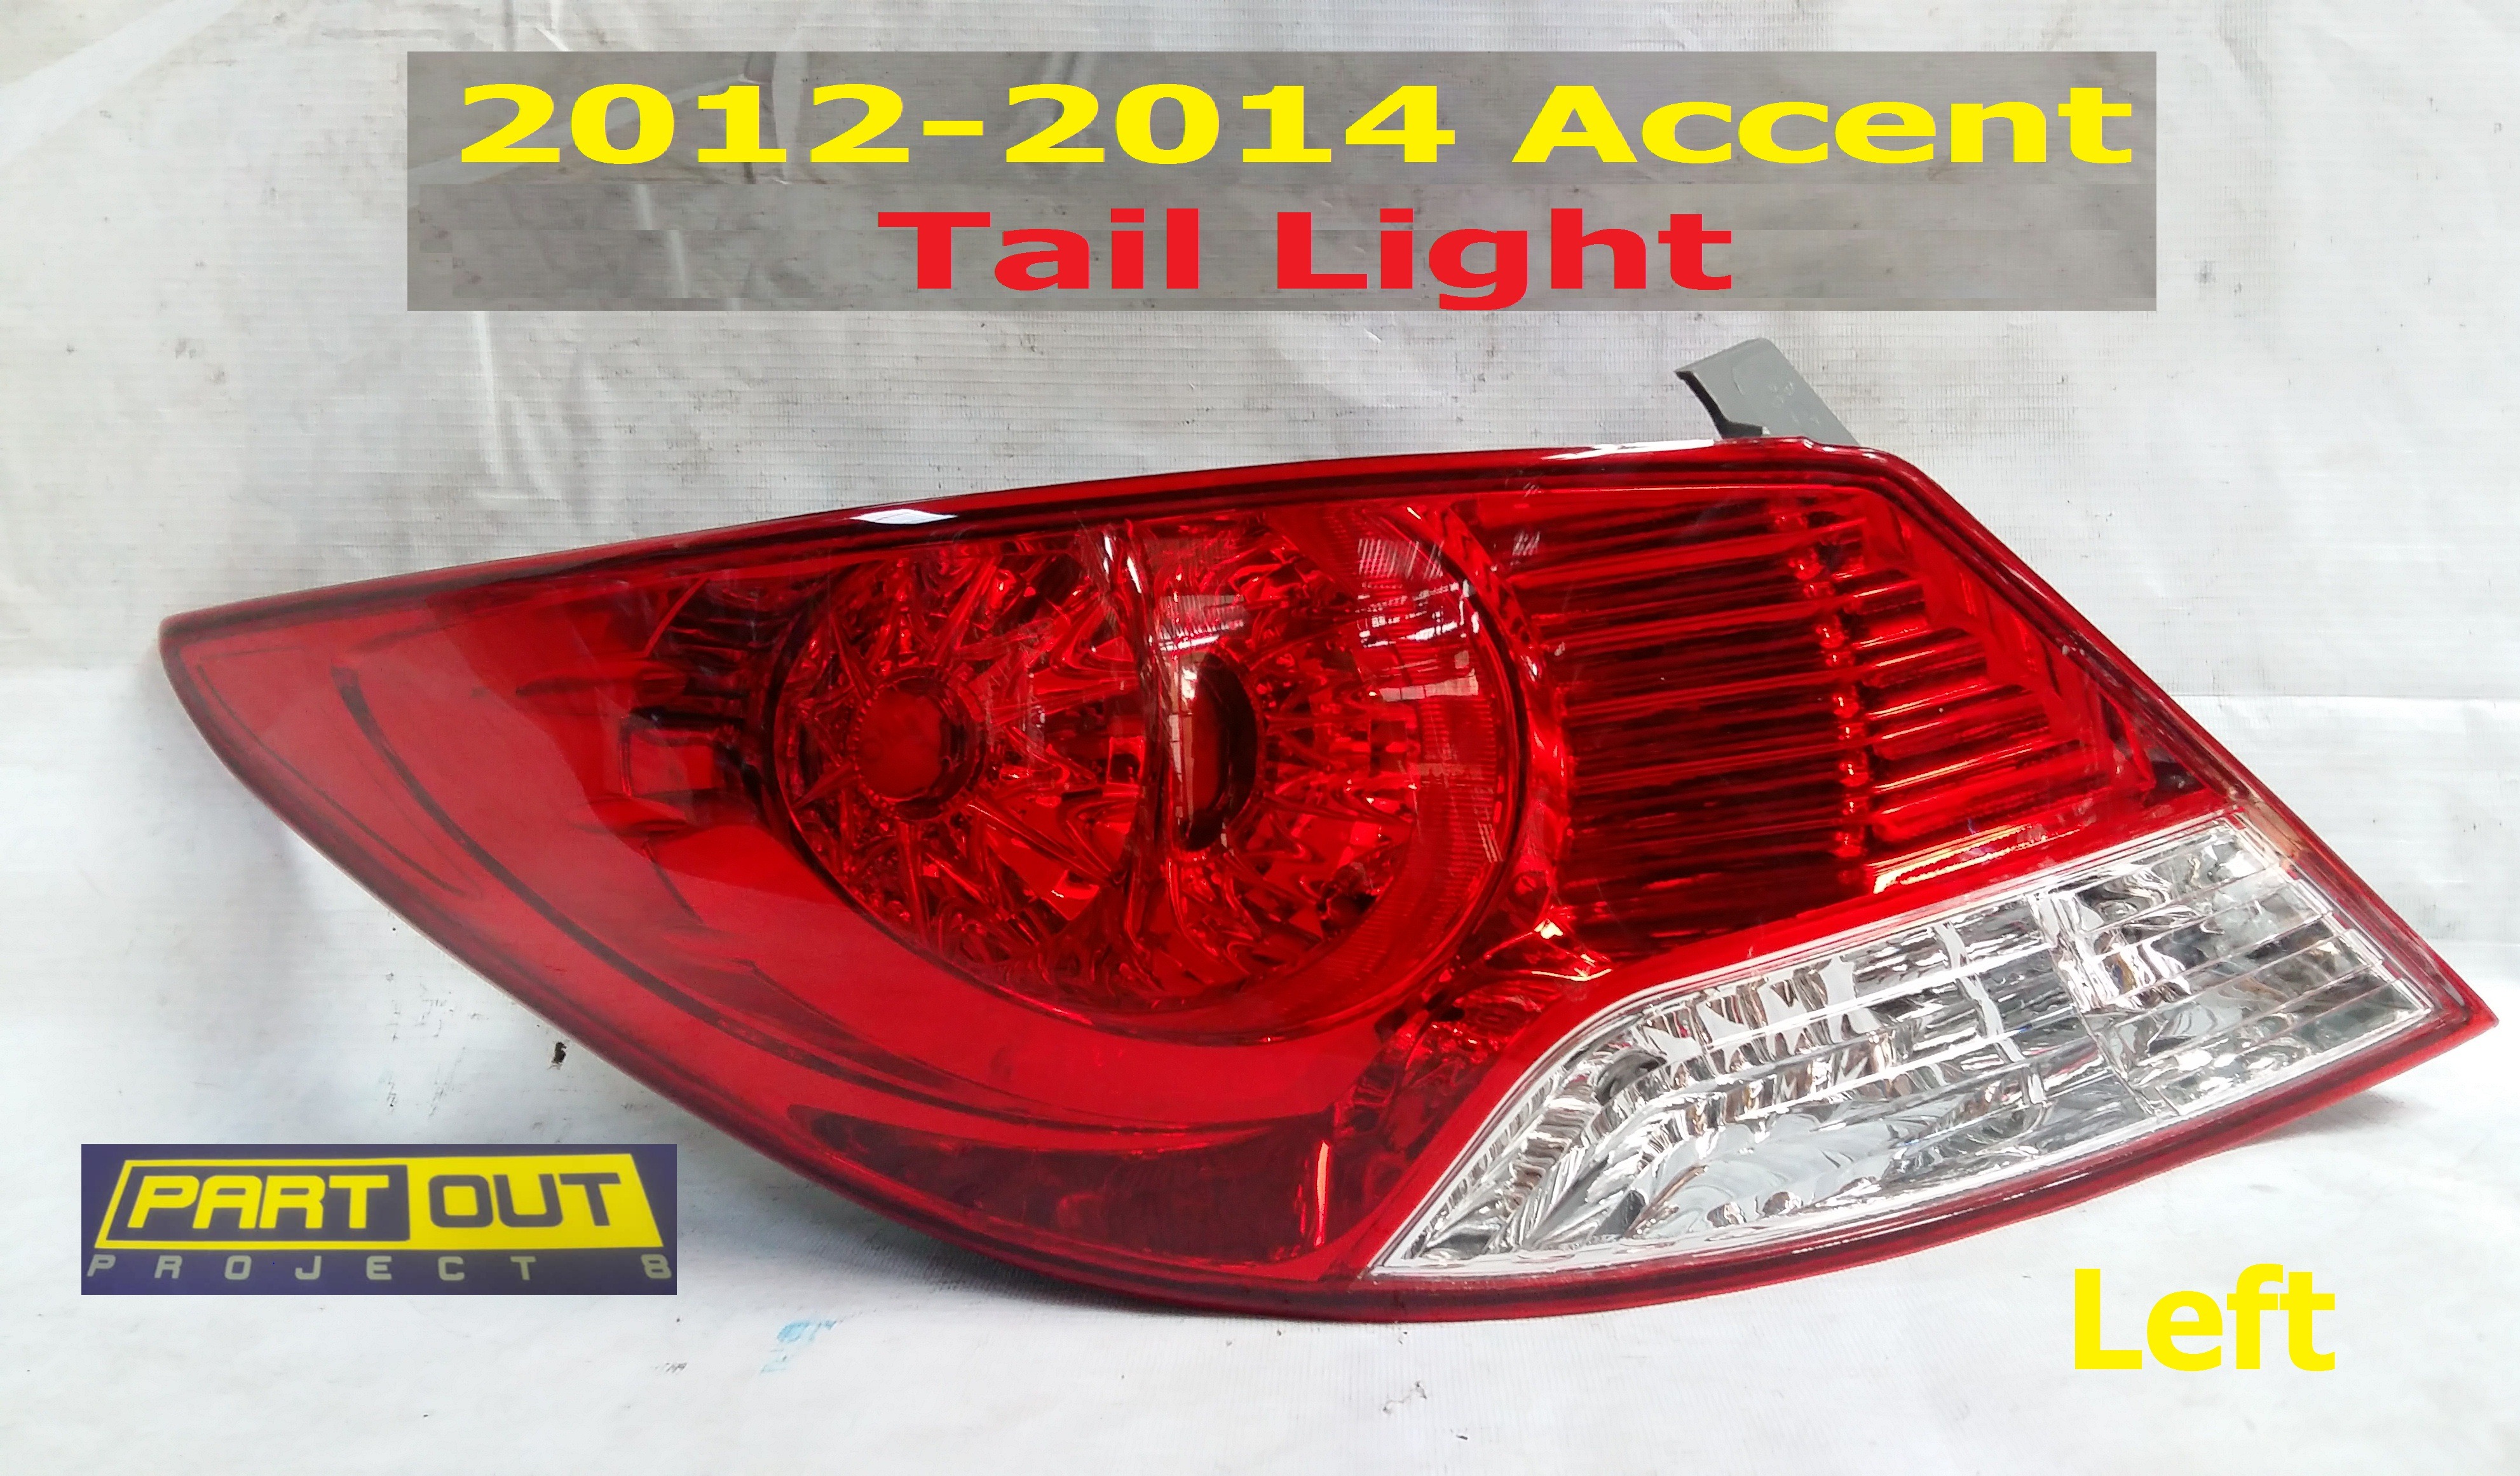 HYUNDAI ACCENT TAIL LIGHT TAIL LAMP 2012-2014 LEFT SIDE Lazada PH